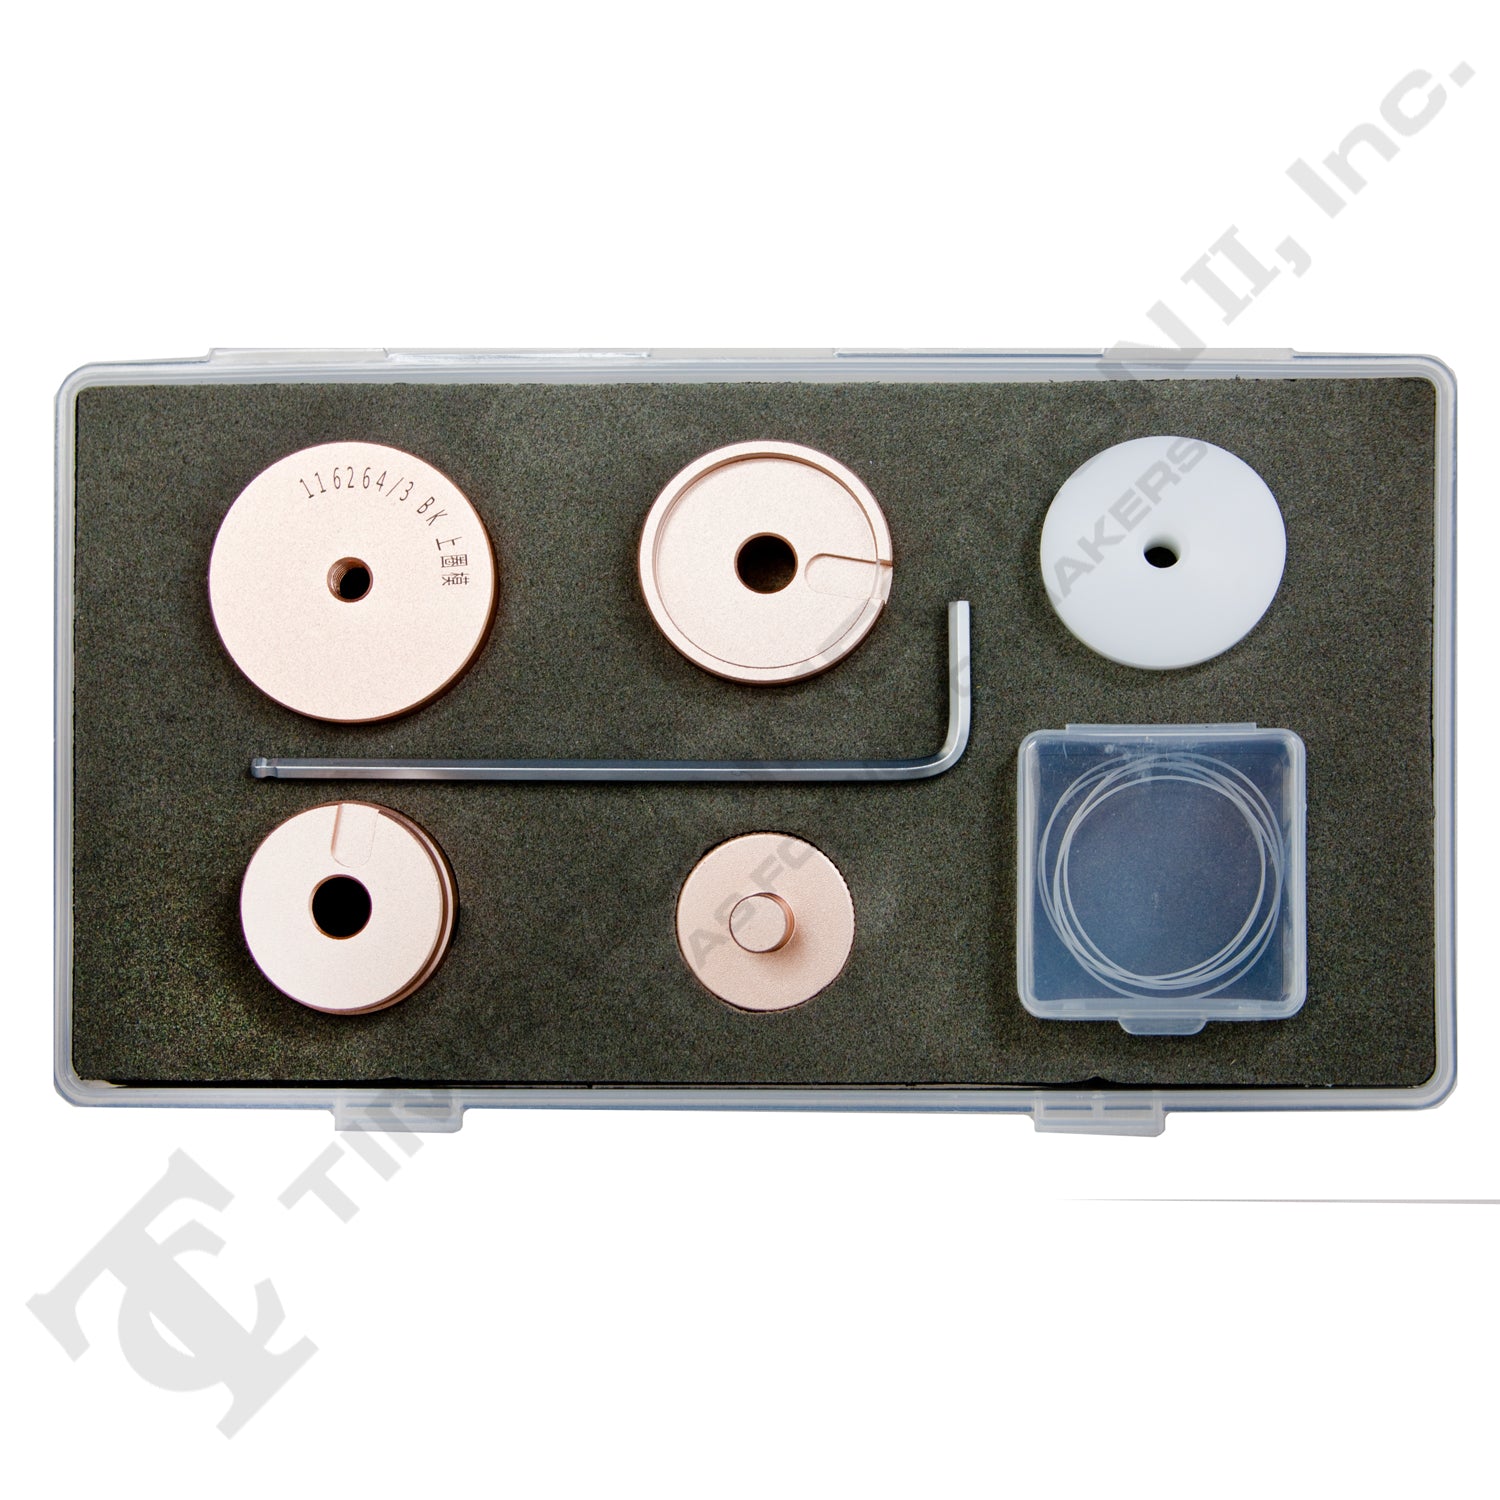 Dies Set to Fit Rolex Crystals and Gaskets for Model No. 116264/3